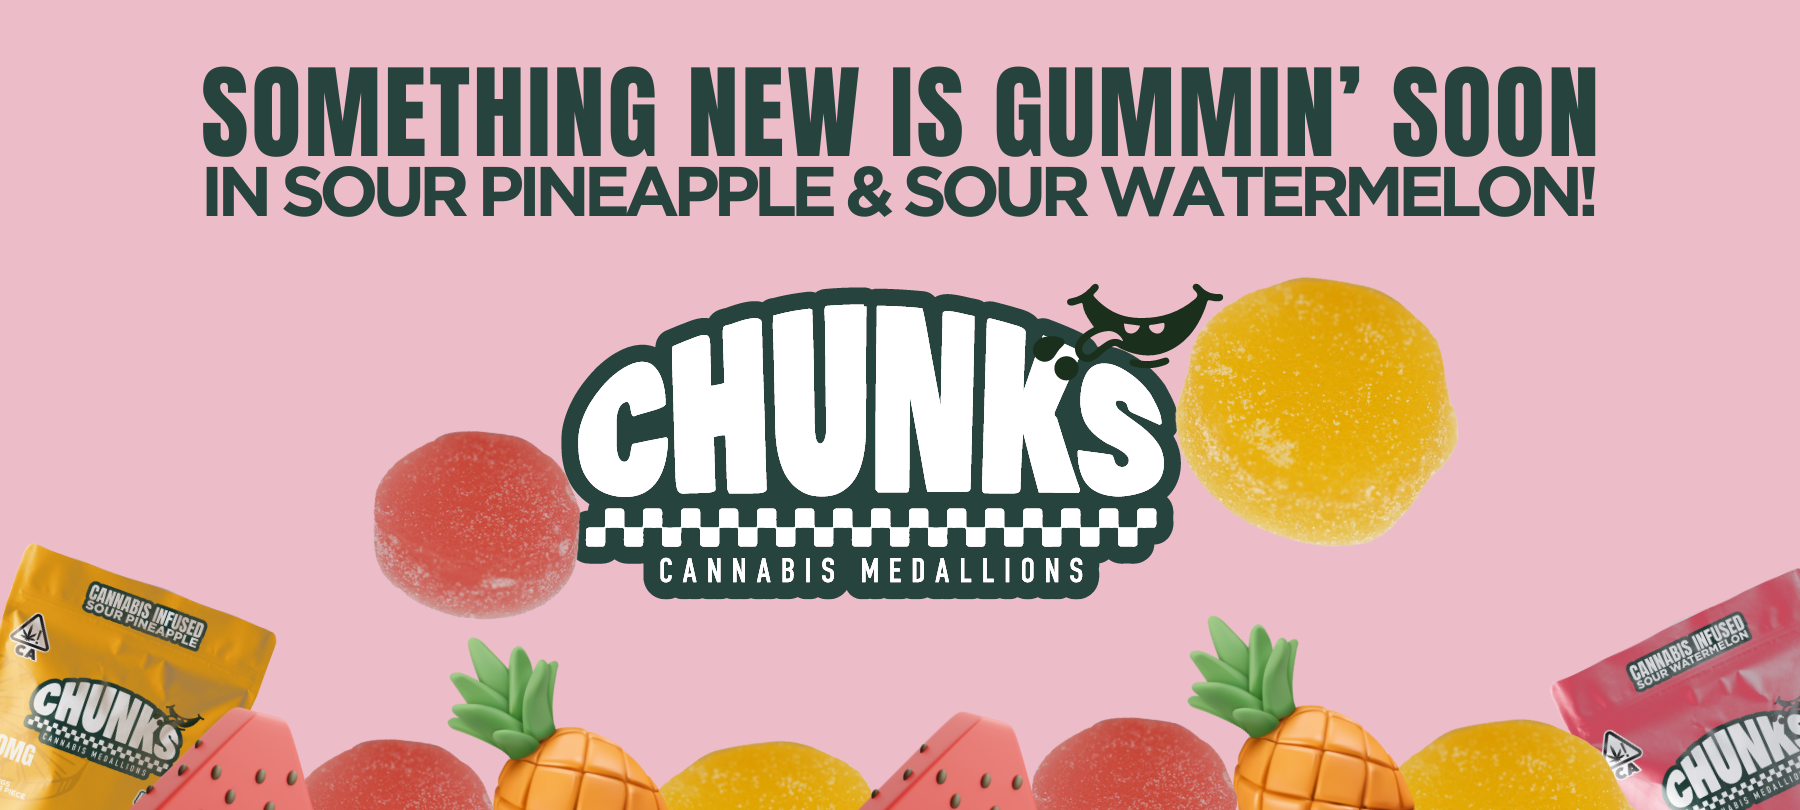 Gummin' Soon from Humble Root. Sour Pineapple and Sour Watermelon edibles.